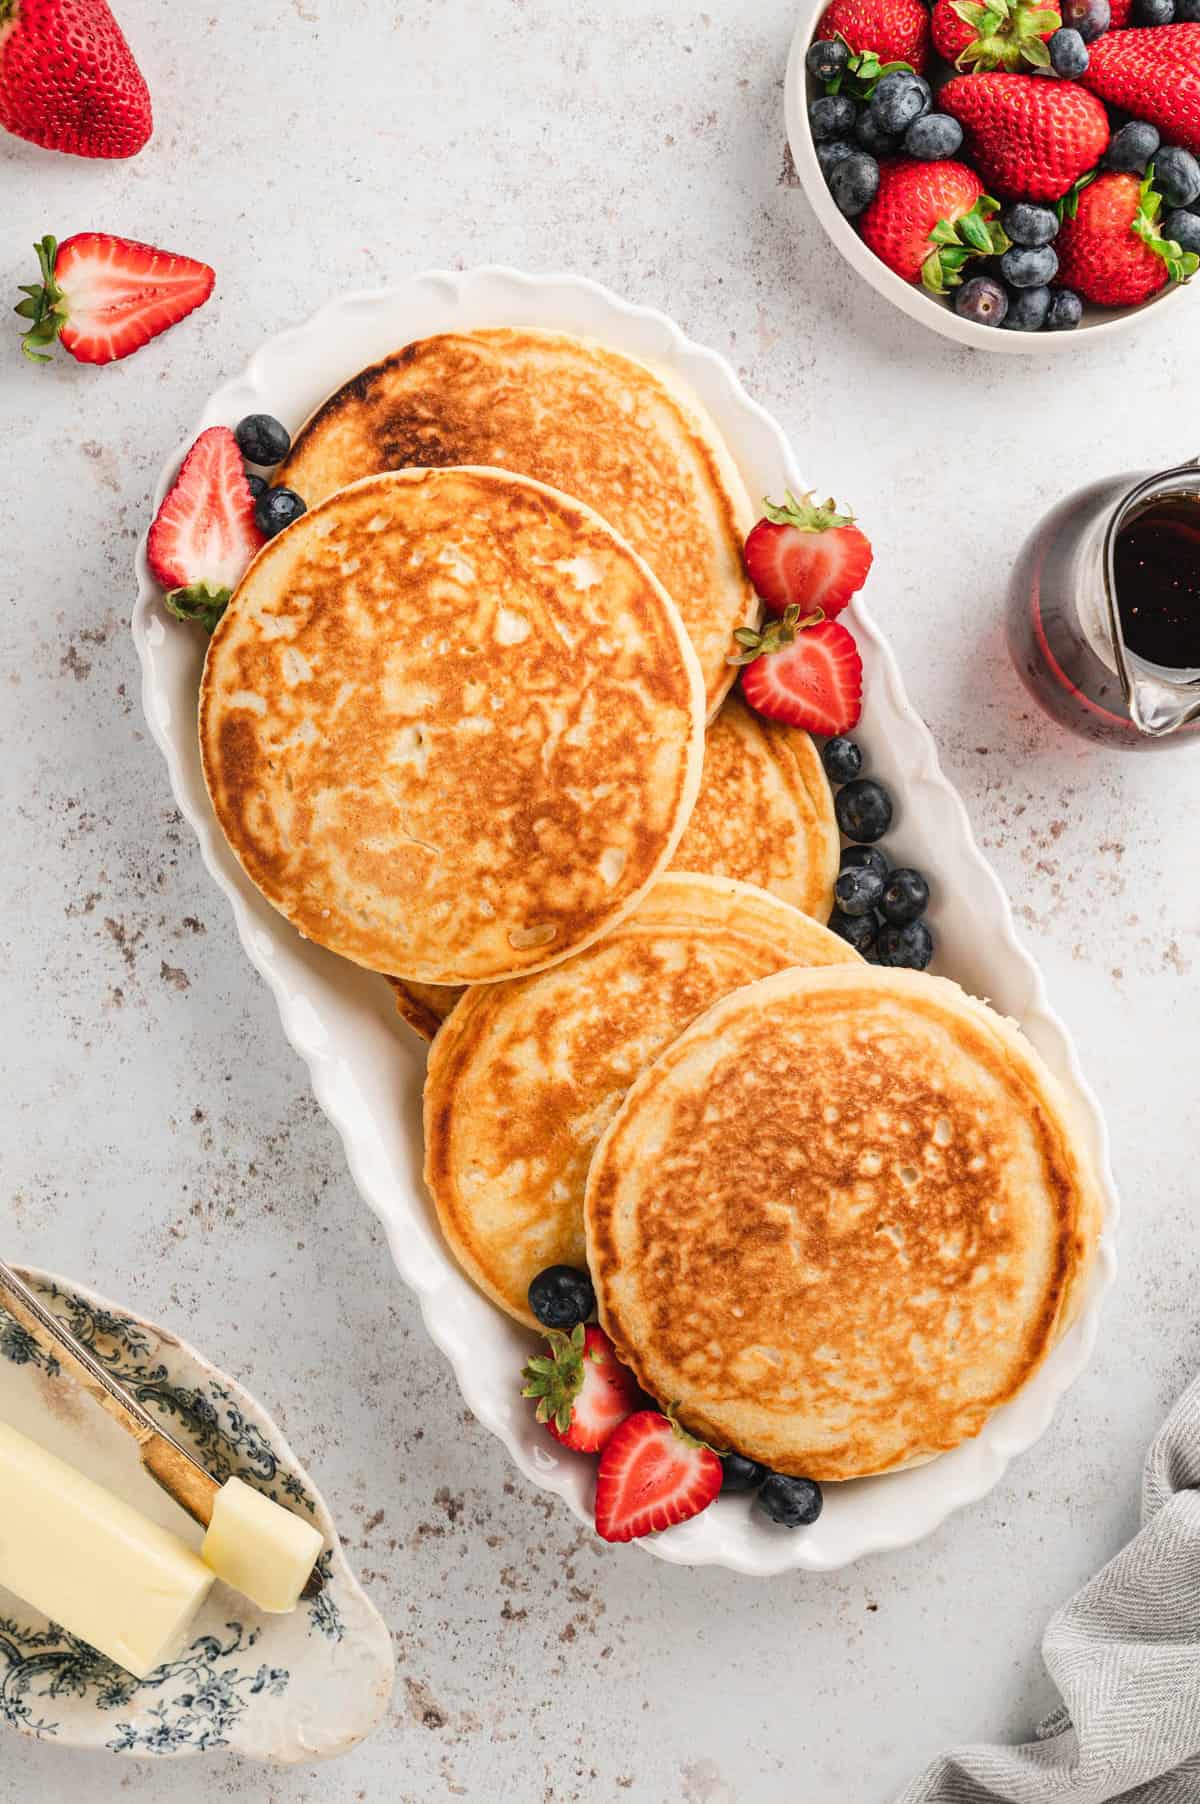 Golden brown homemade pancakes on serving tray with fresh fruit